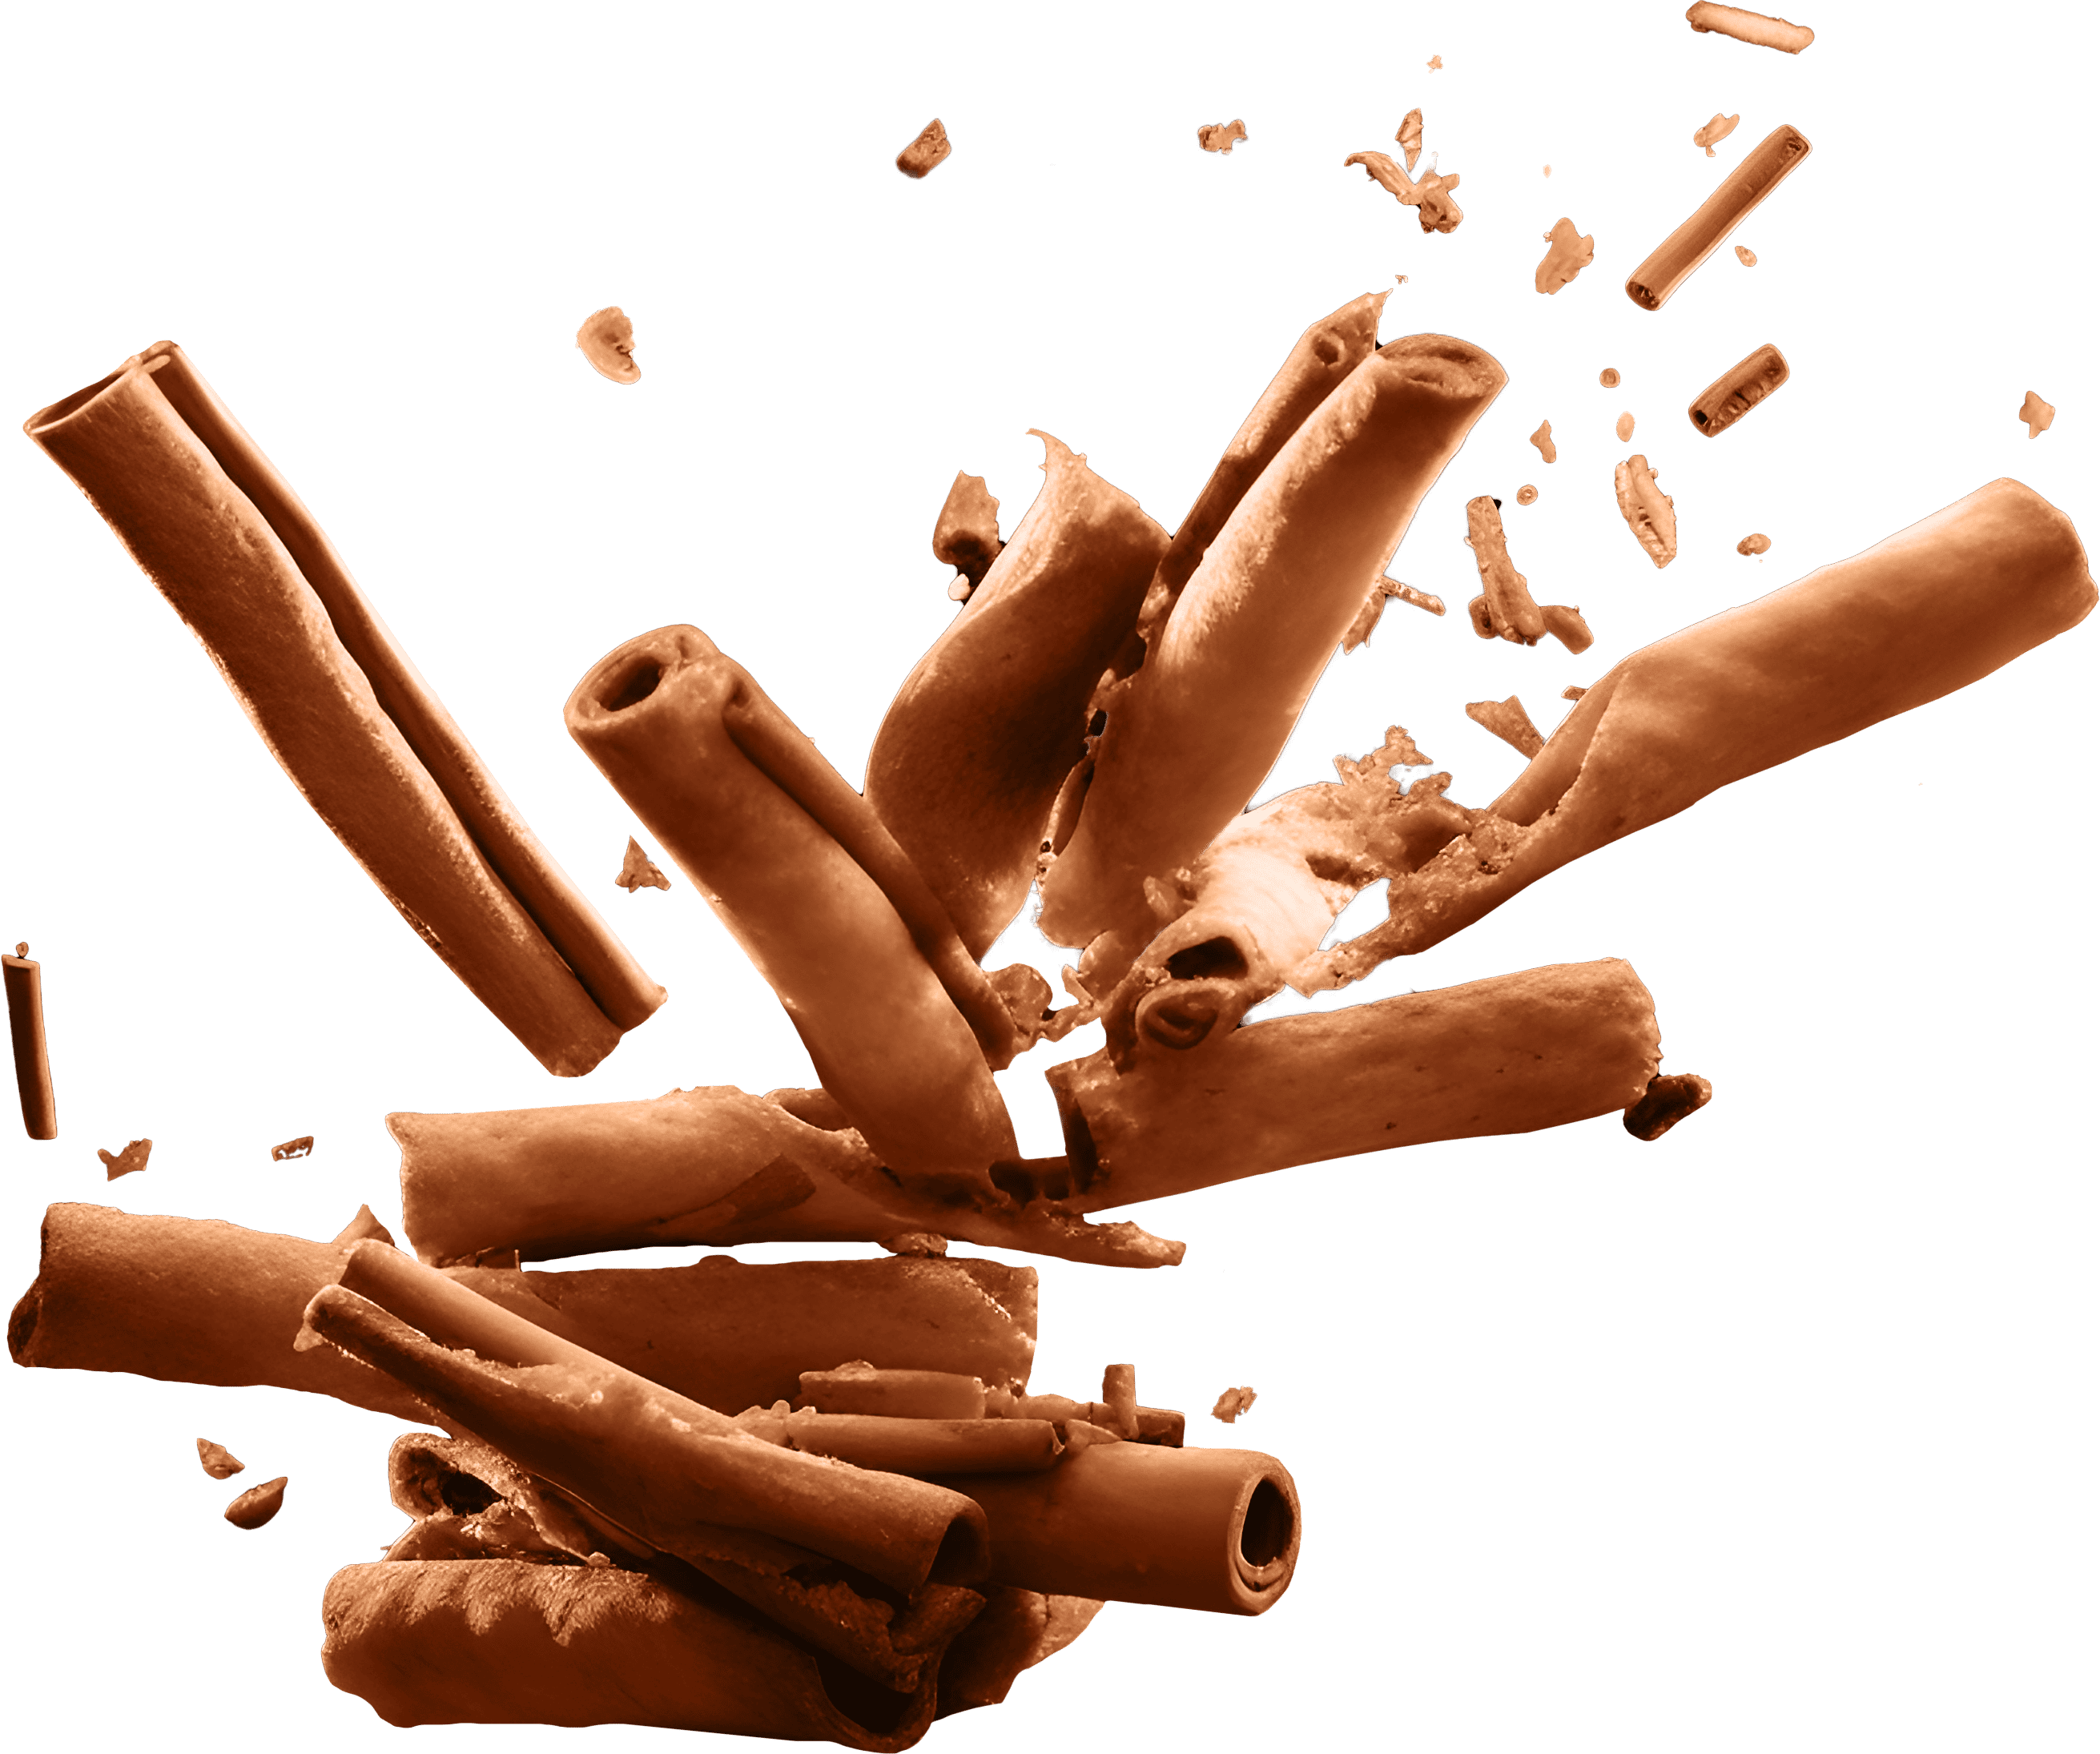 Cinnamon sticks exploding on a green background.